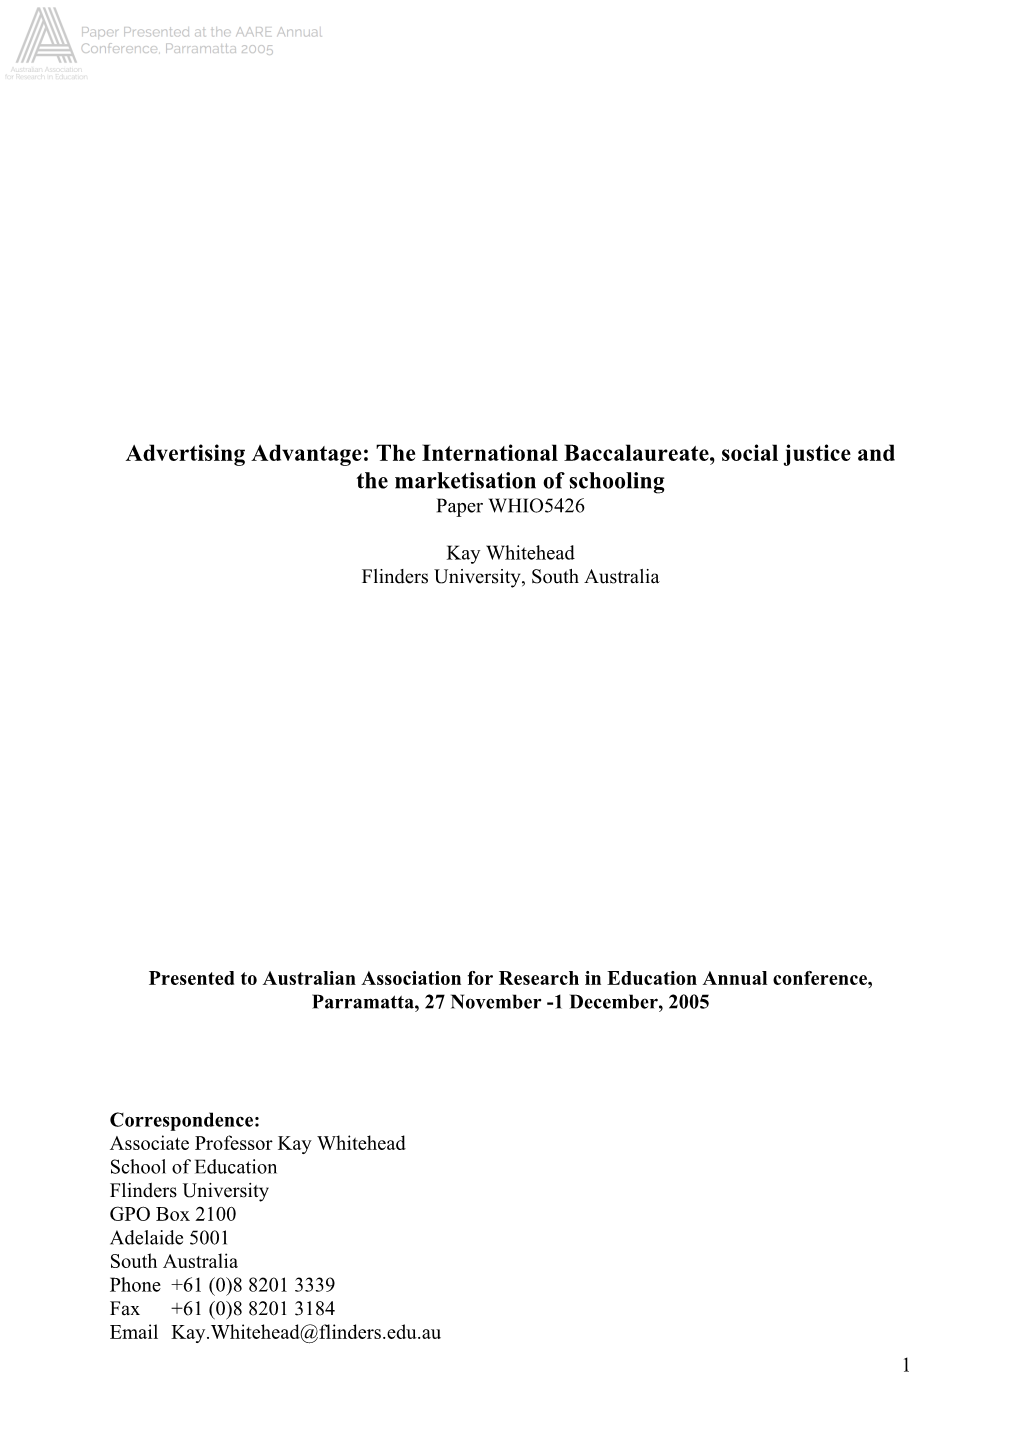 The International Baccalaureate, Social Justice and the Marketisation of Schooling Paper WHIO5426